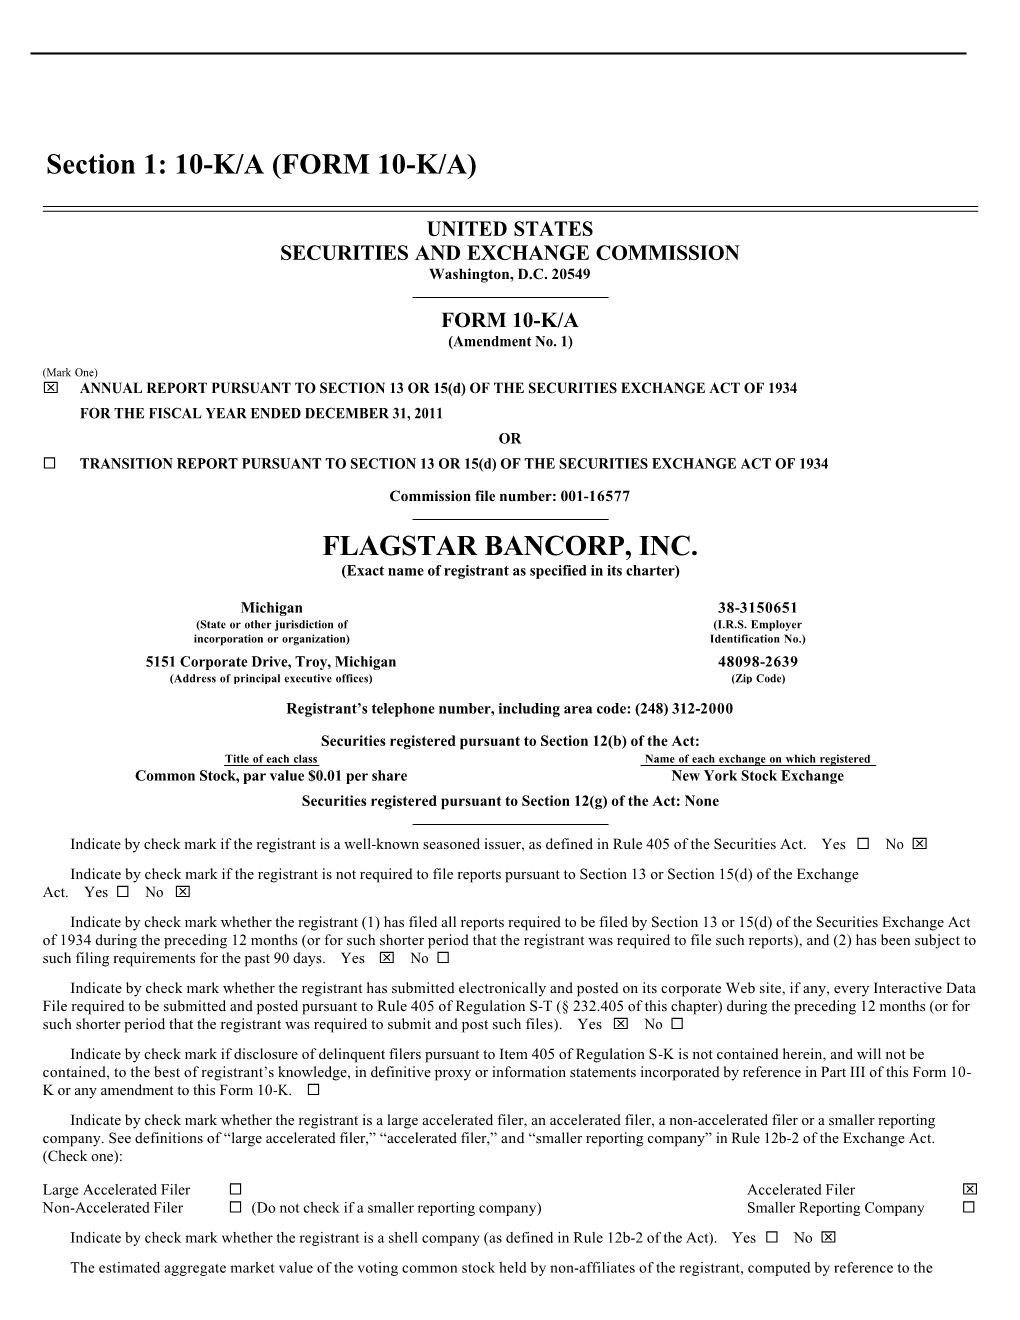 FLAGSTAR BANCORP, INC. Section 1: 10-K/A